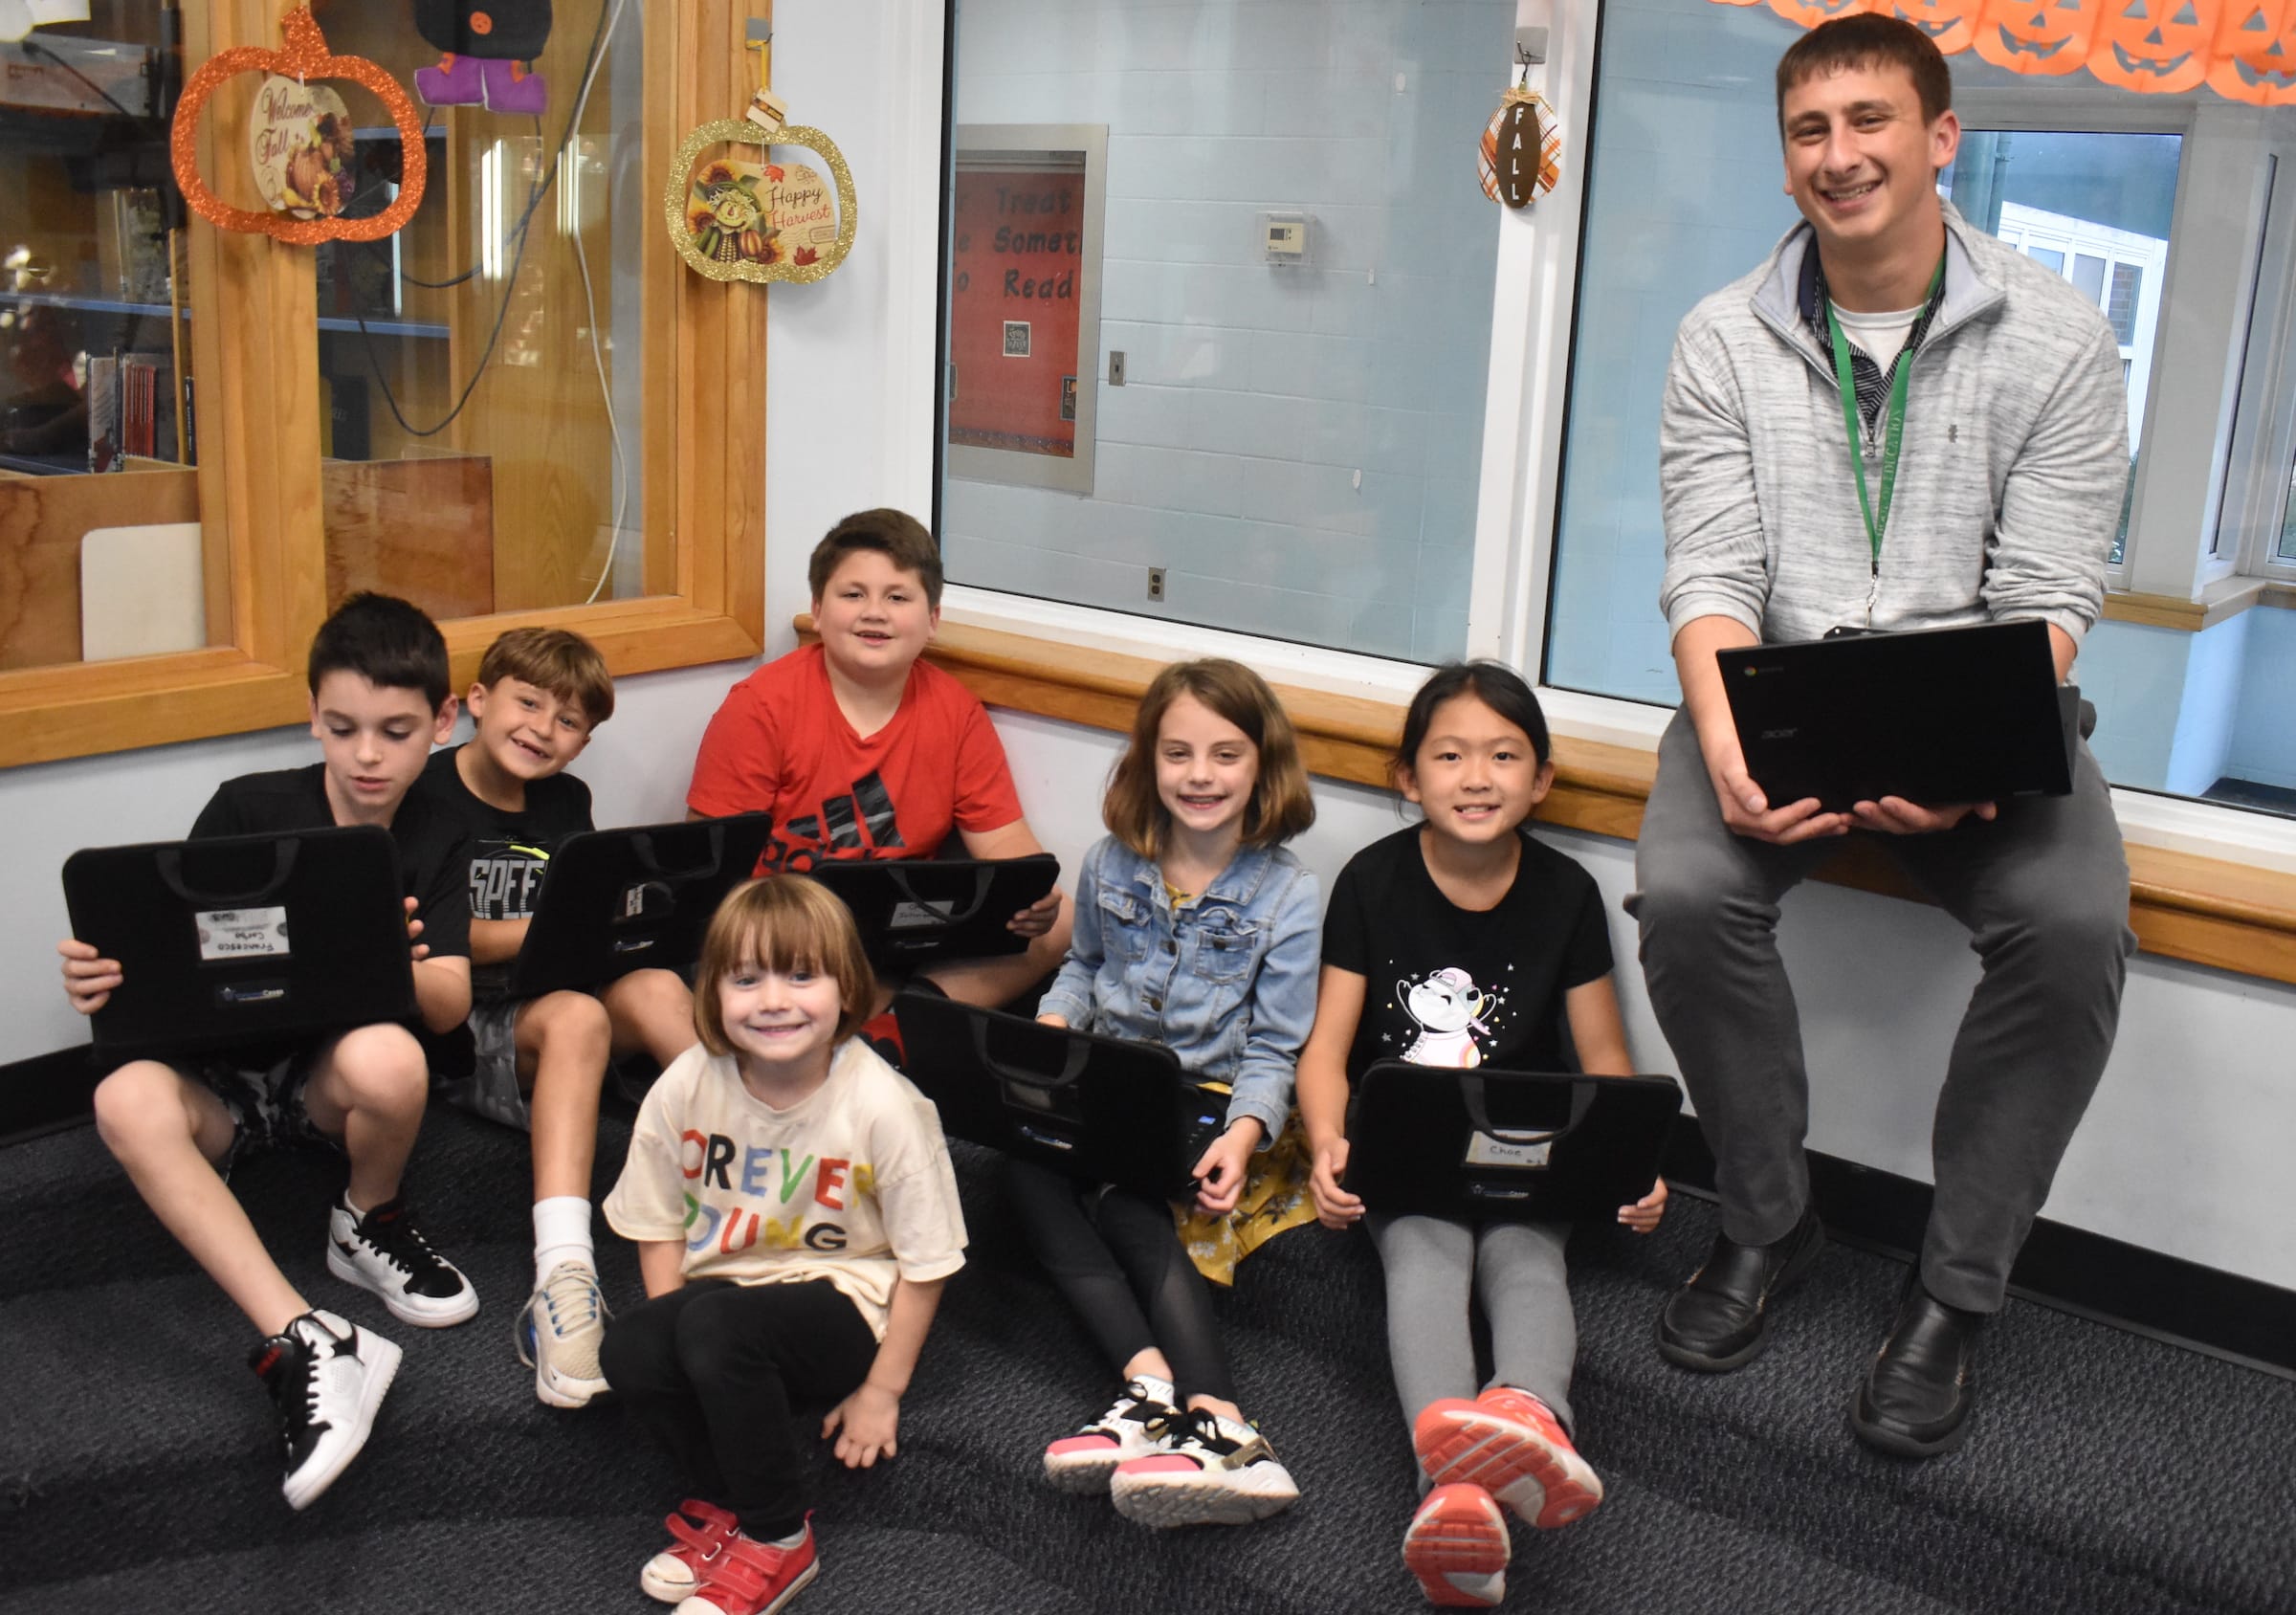 A Digital World Opens At Wantagh’s Forest Lake School